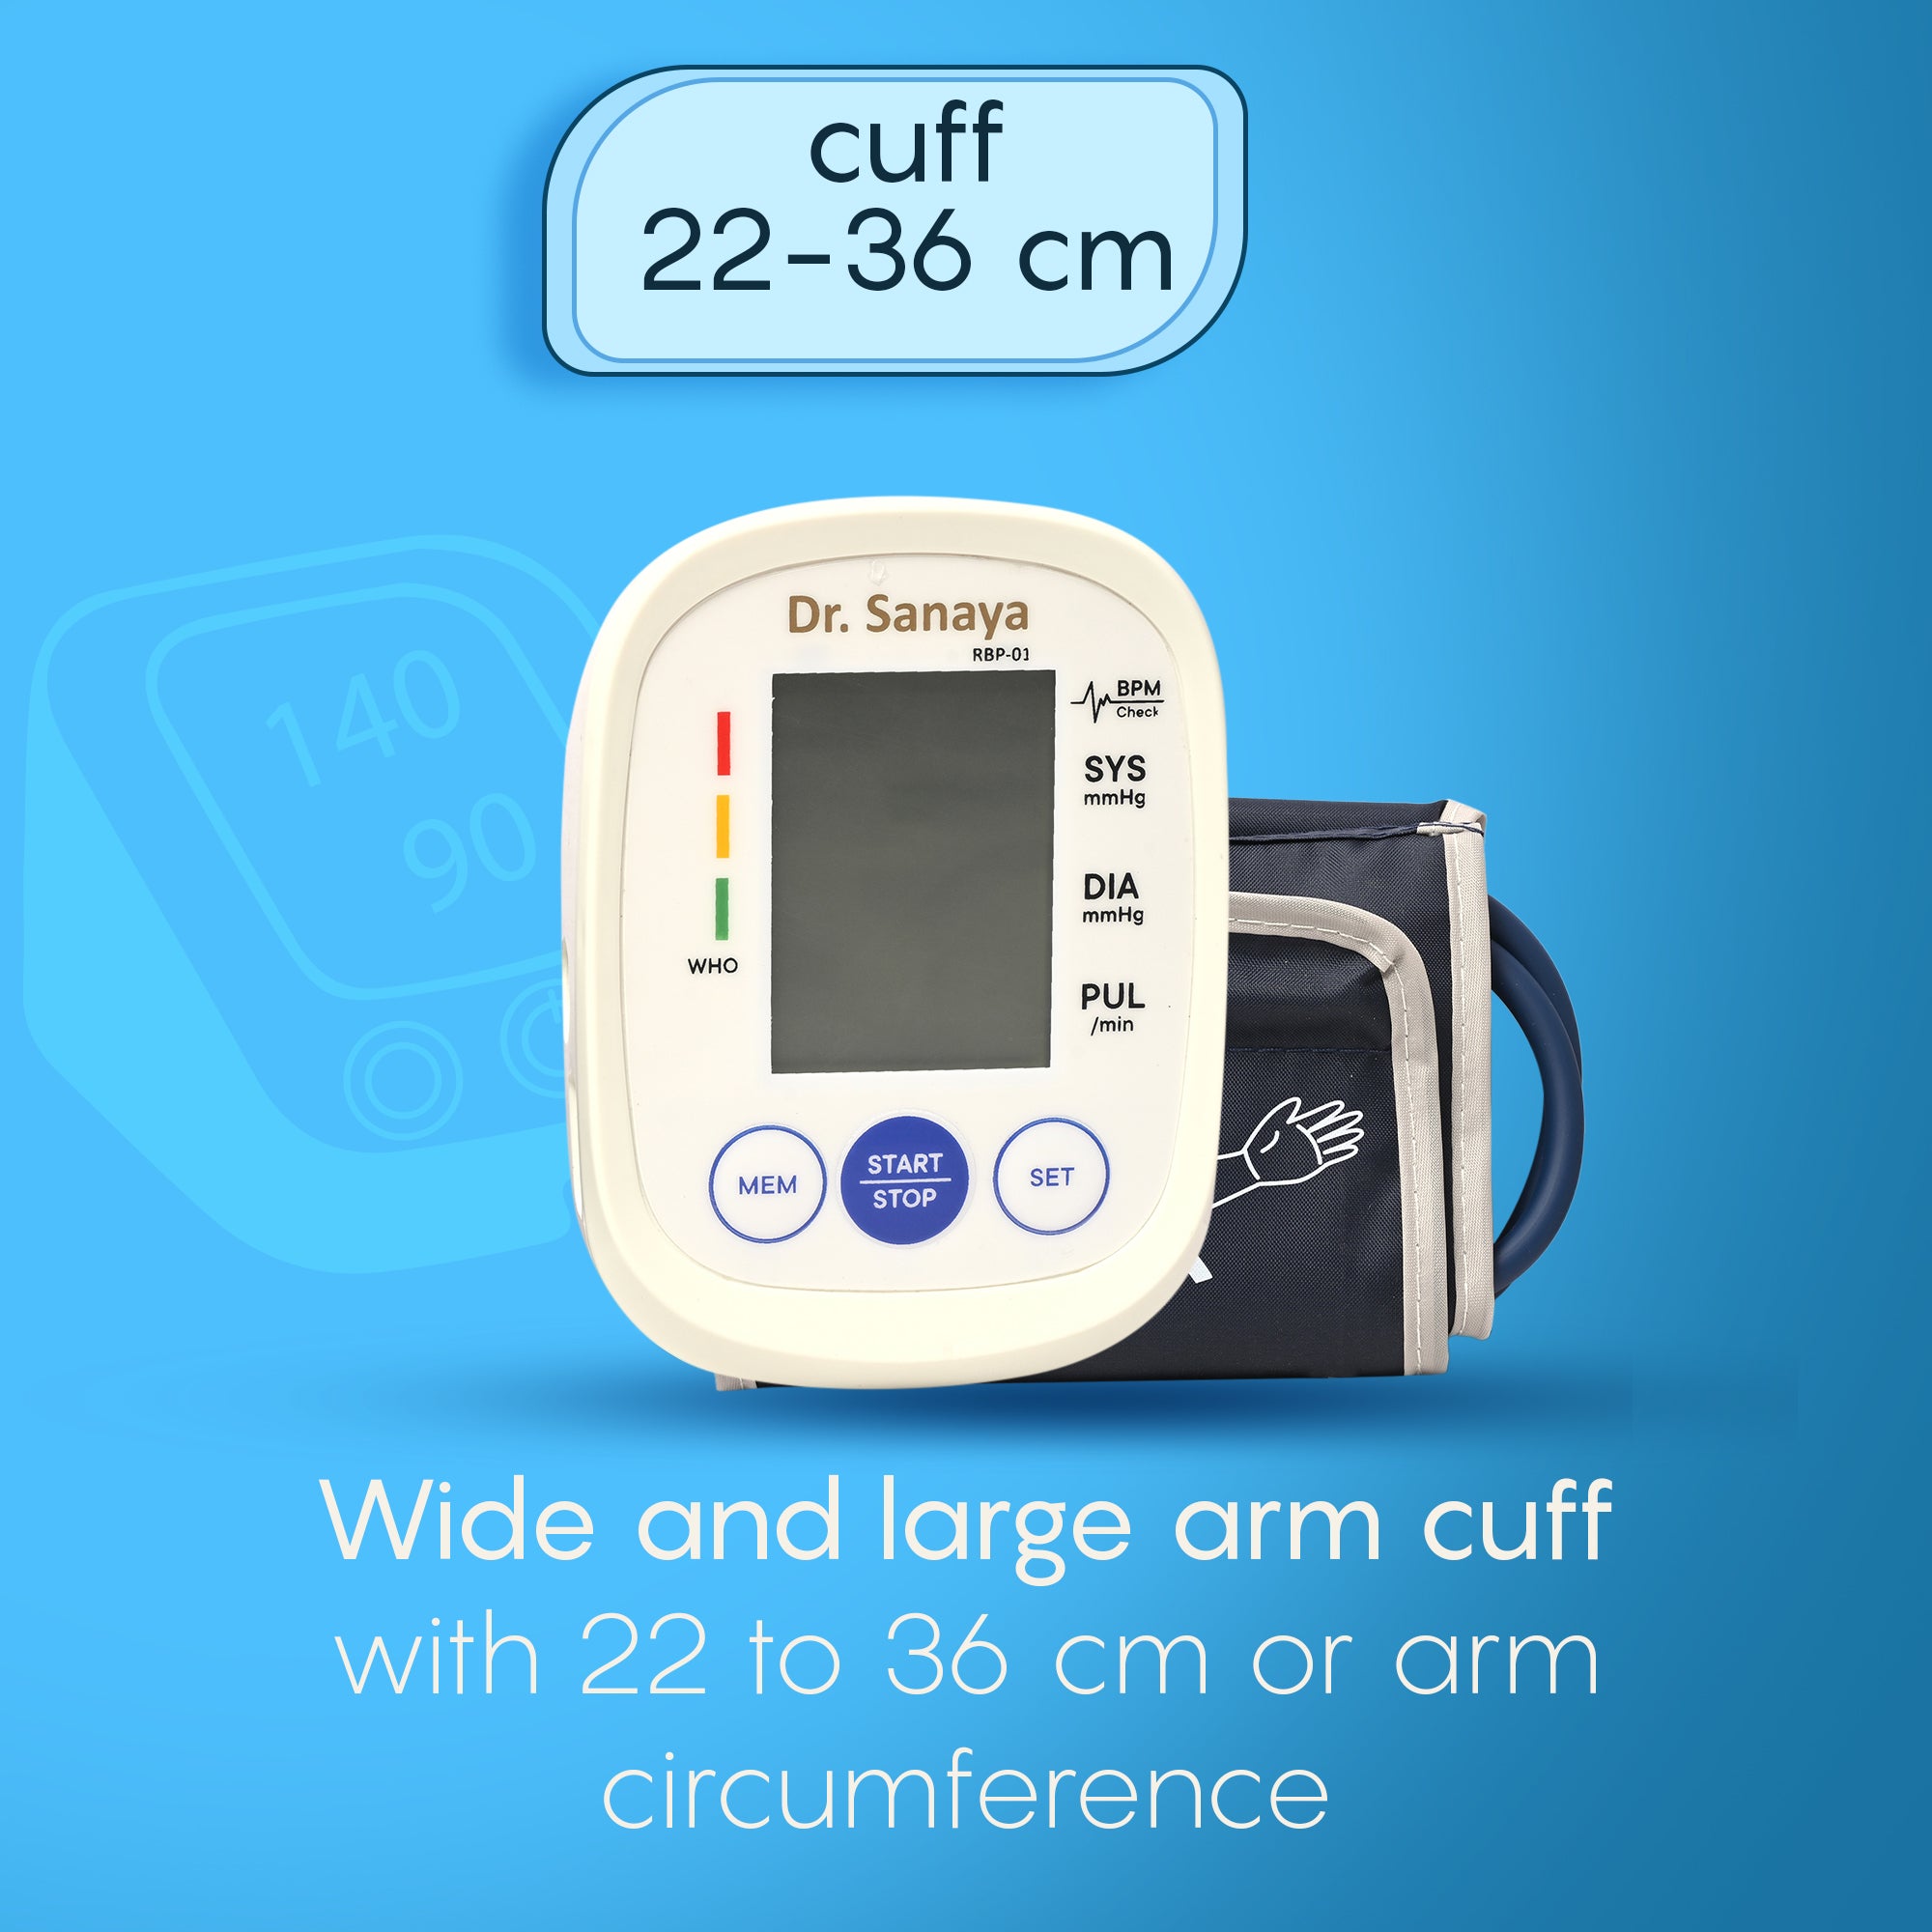 Dr. Sanaya Fully Automatic Digital Blood Pressure Monitor with C-Type USB Port,Cuff Size(Arm Circumference 22-36 Cm) and Most Accurate Measurement Bp Monitor (White)